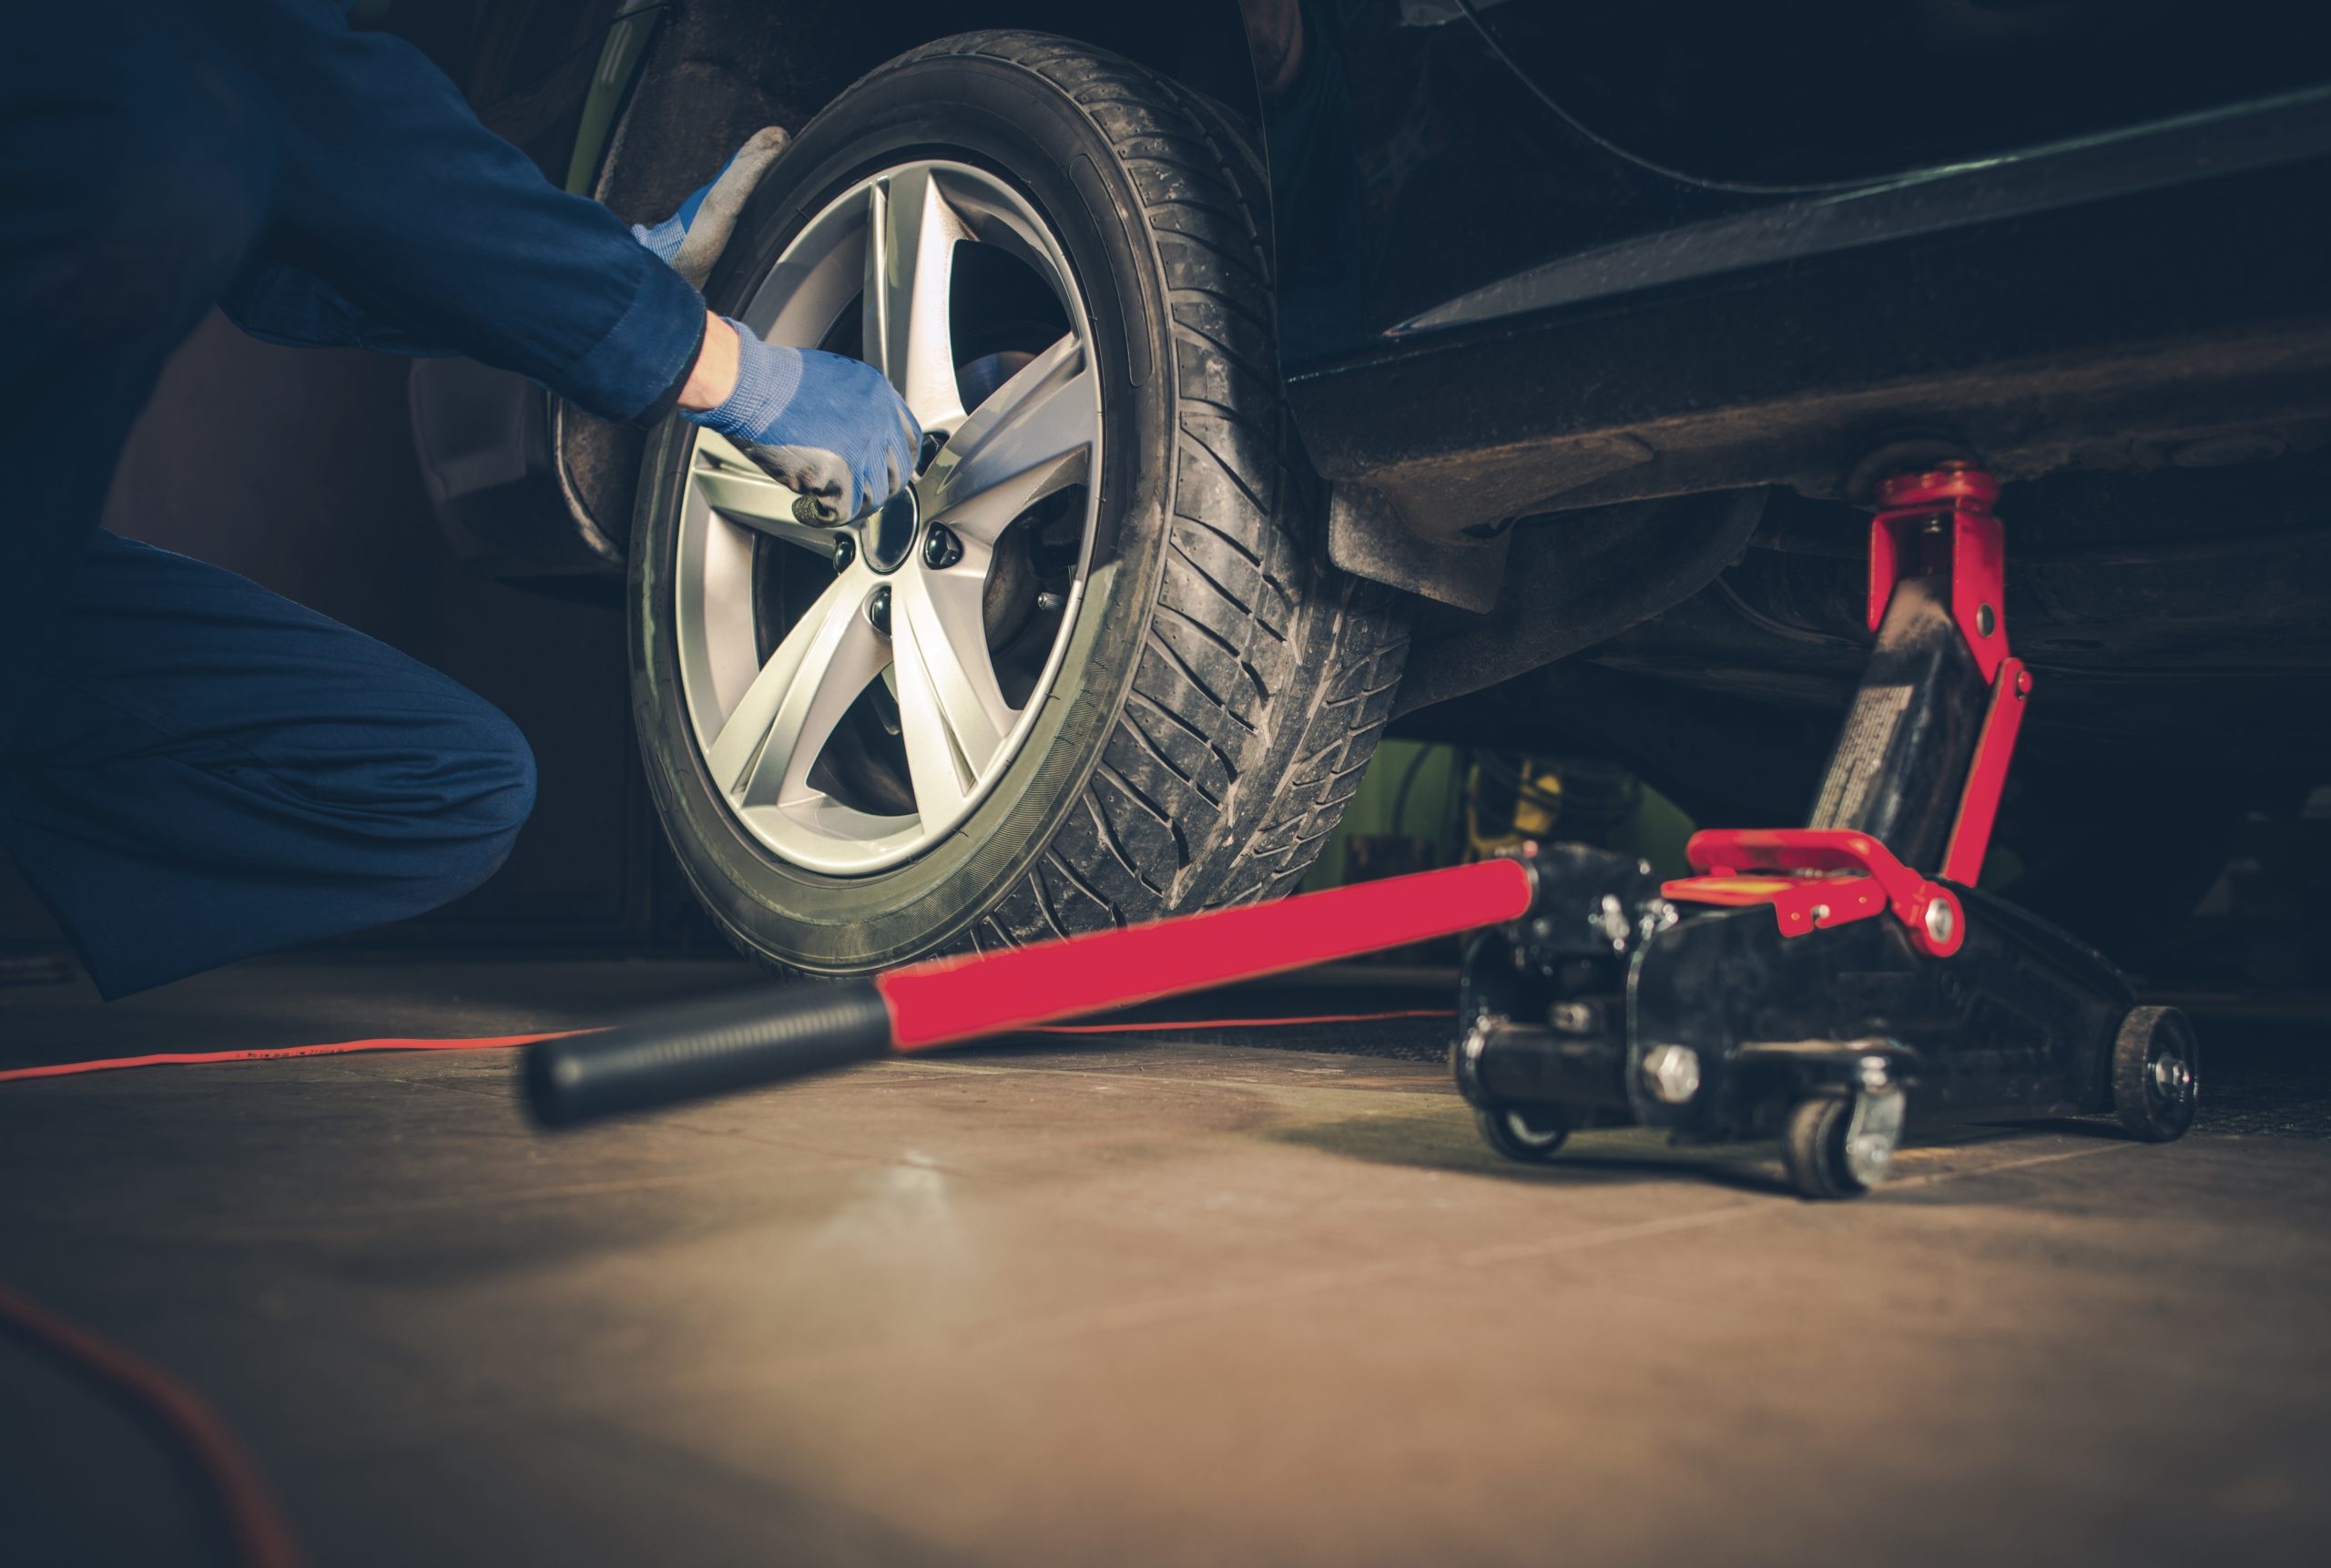 How to Change a Tire in 5 Easy Steps